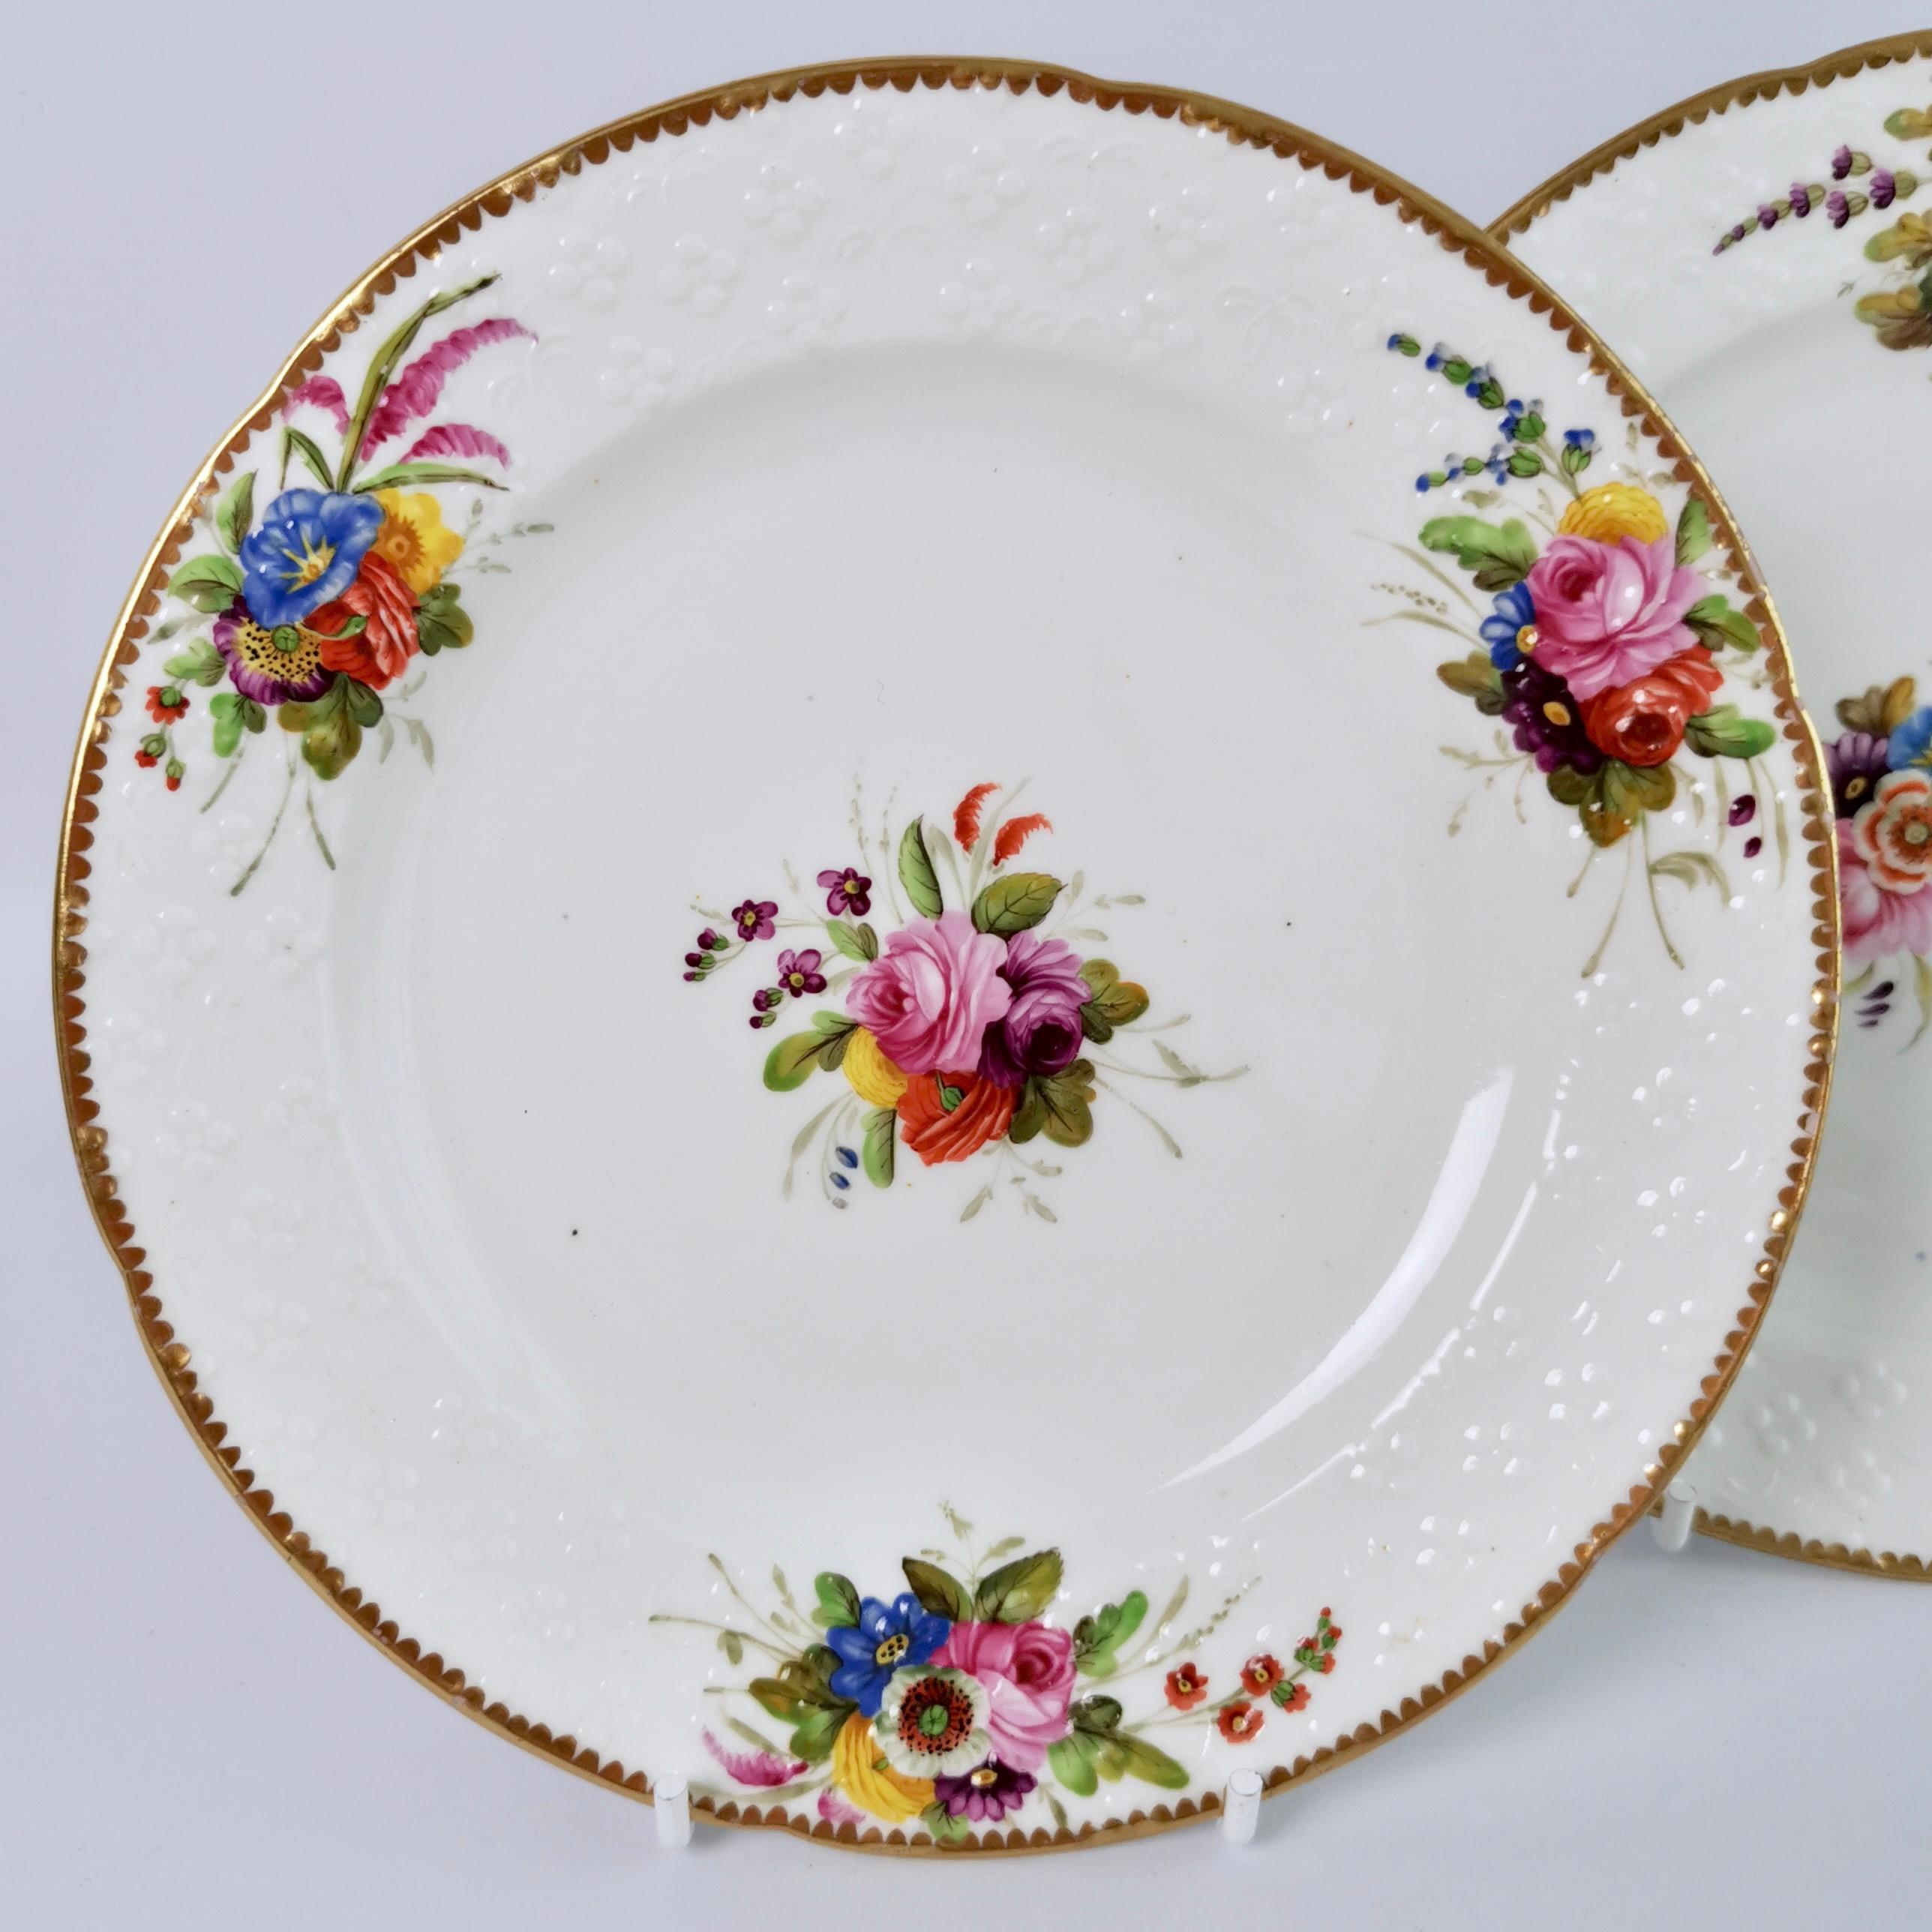 This is a very charming pair of tea plates made by Spode in or shortly after 1816. The plates are small and ideal for sandwiches or cake, or a side plate for salad.
 
Spode was the great pioneer among the Georgian potters in England. Around the